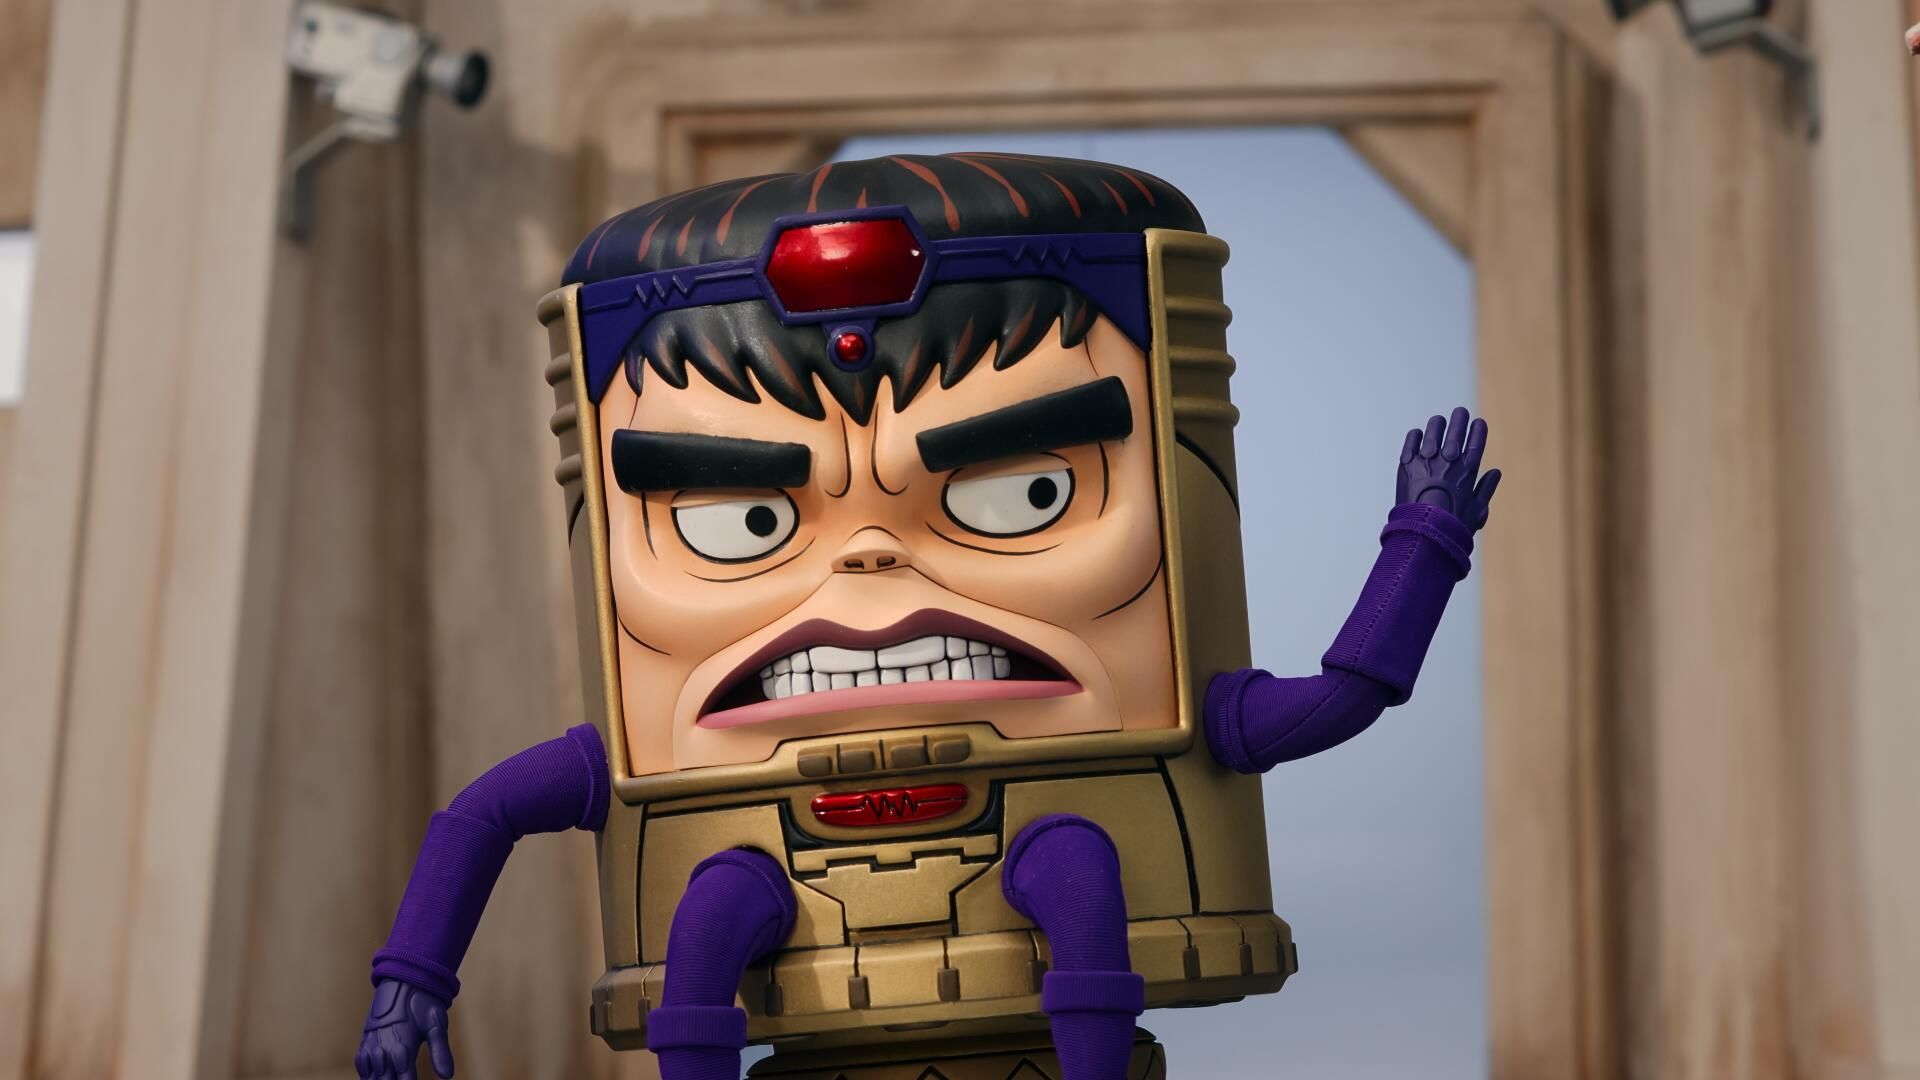 MODOK Explained - What's Up With Ant-Man and the Wasp: Quantumania's  Big-Headed Baddie?